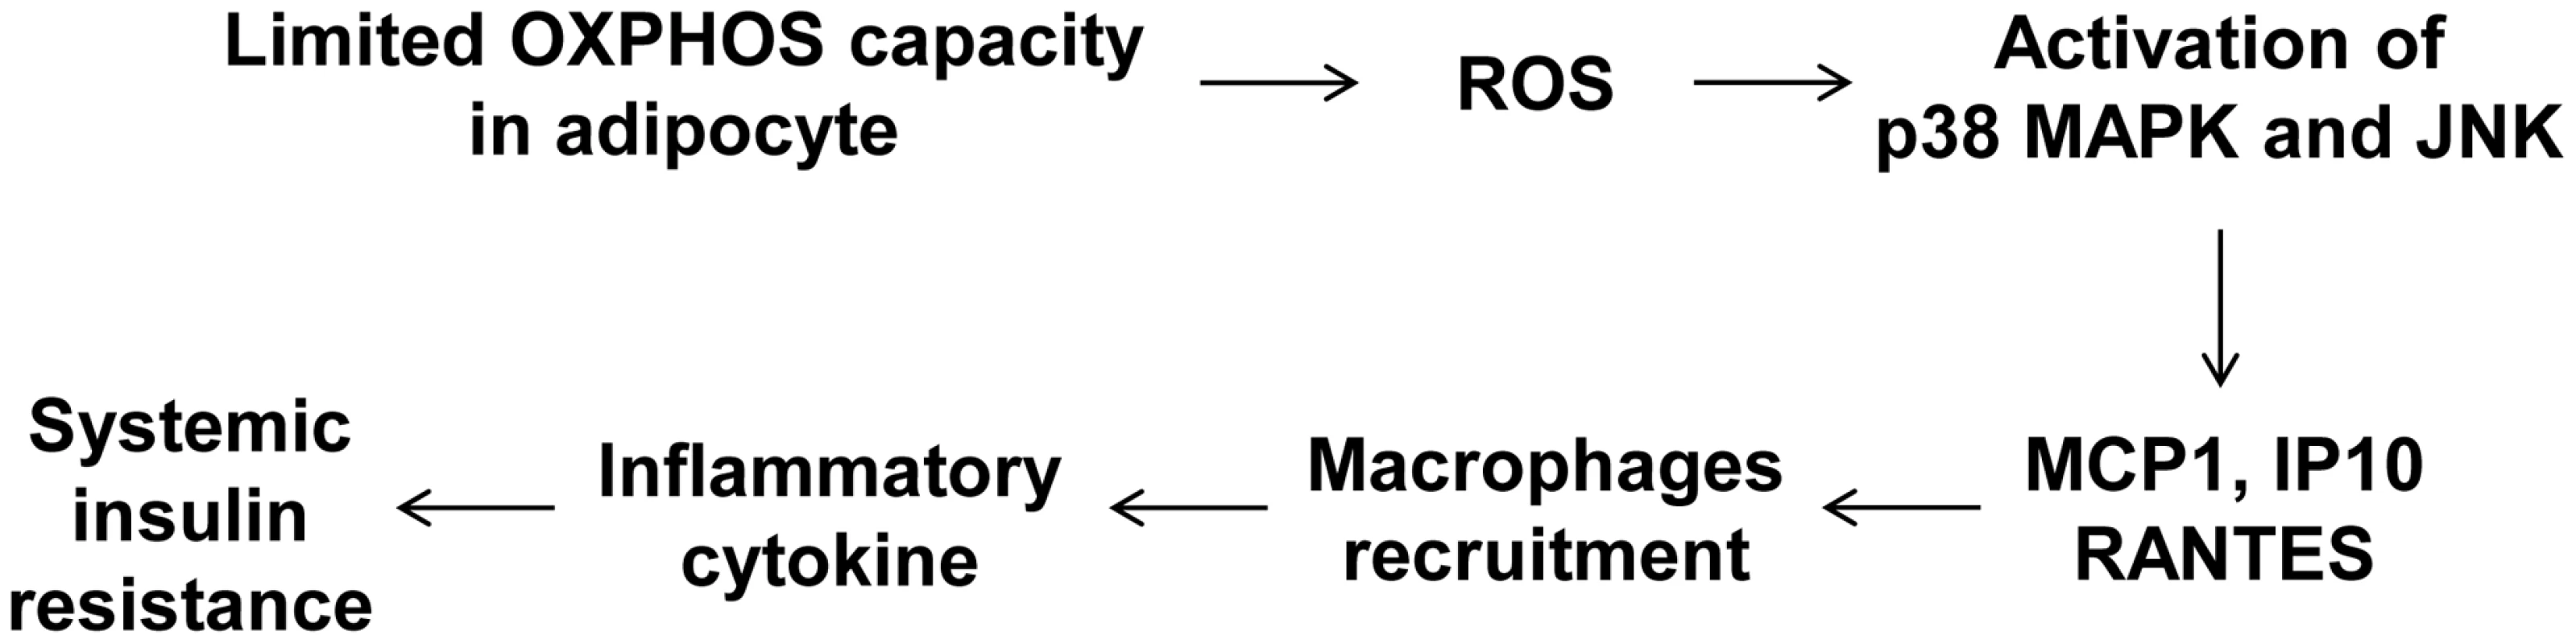 A model of the systemic insulin resistance developed by &lt;i&gt;Crif1&lt;/i&gt;-haploinsufficient mice, which shows limited adipose OXPHOS capacity.